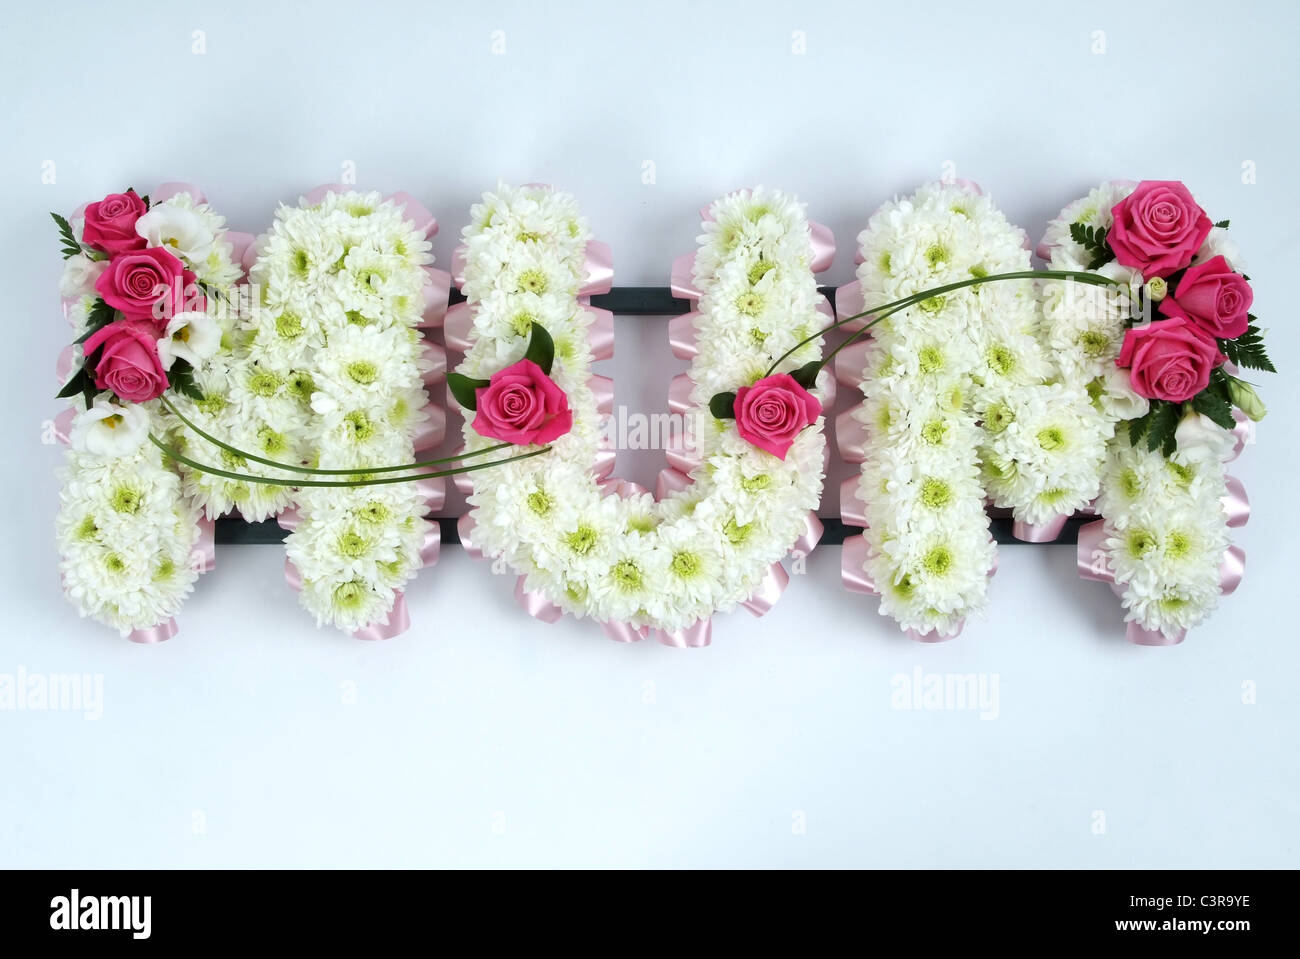 Funeral Flowers UK, Wreaths for Funerals